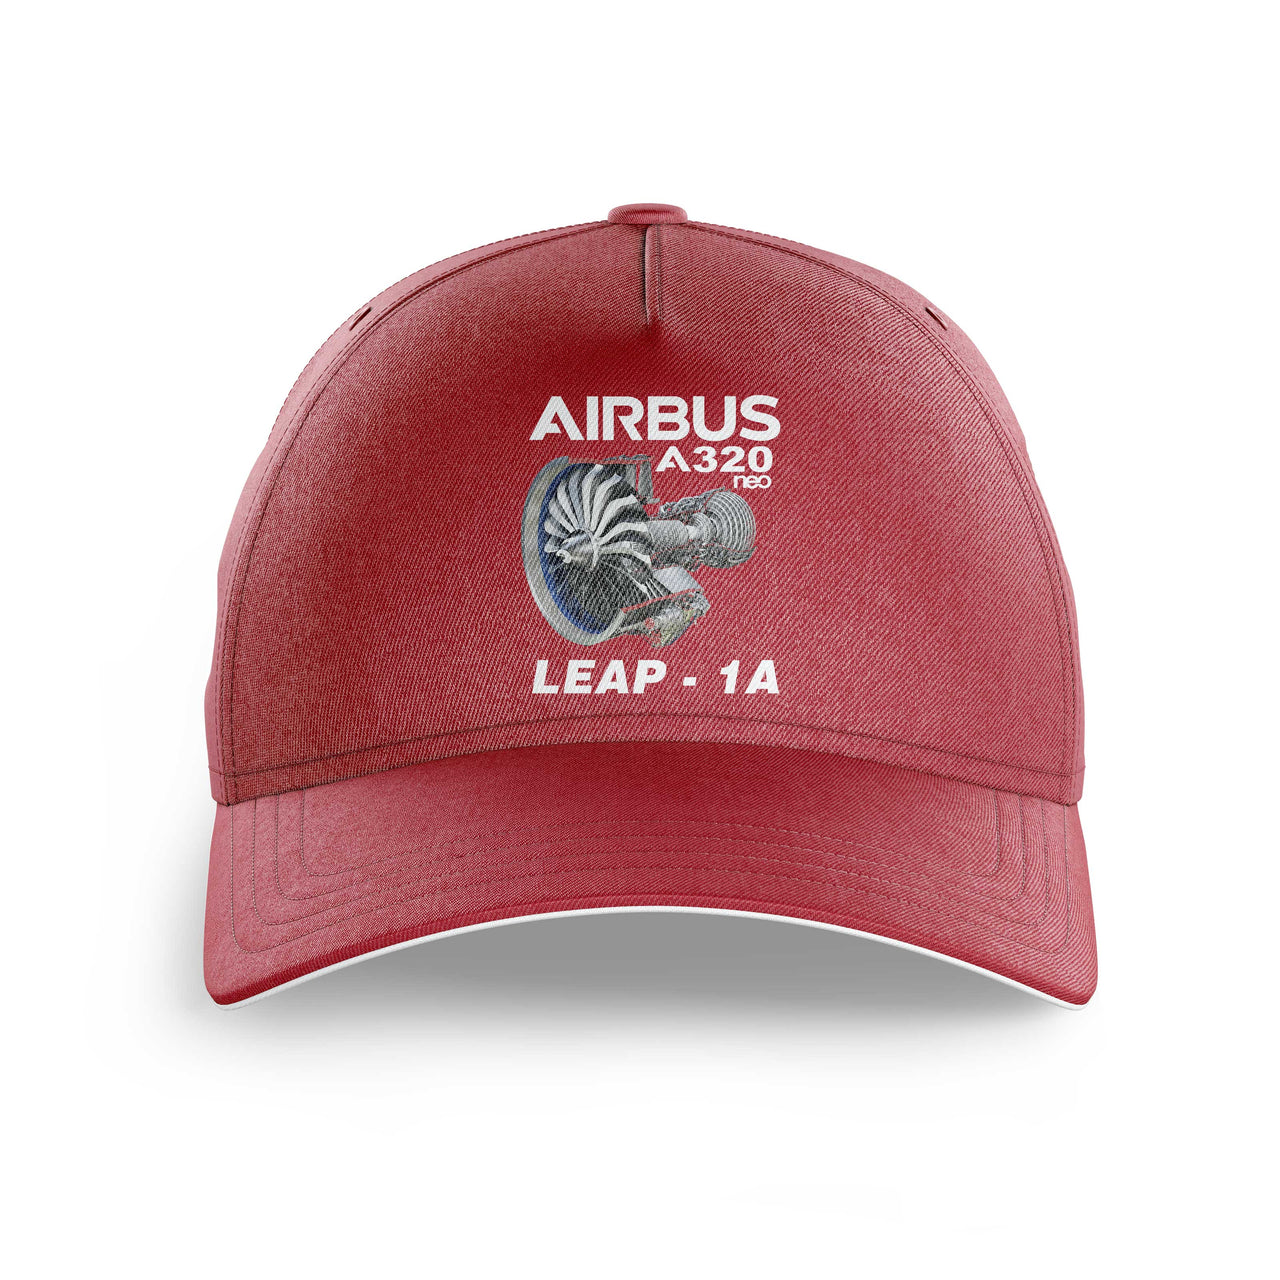 Airbus A320neo & Leap 1A Engine Printed Hats